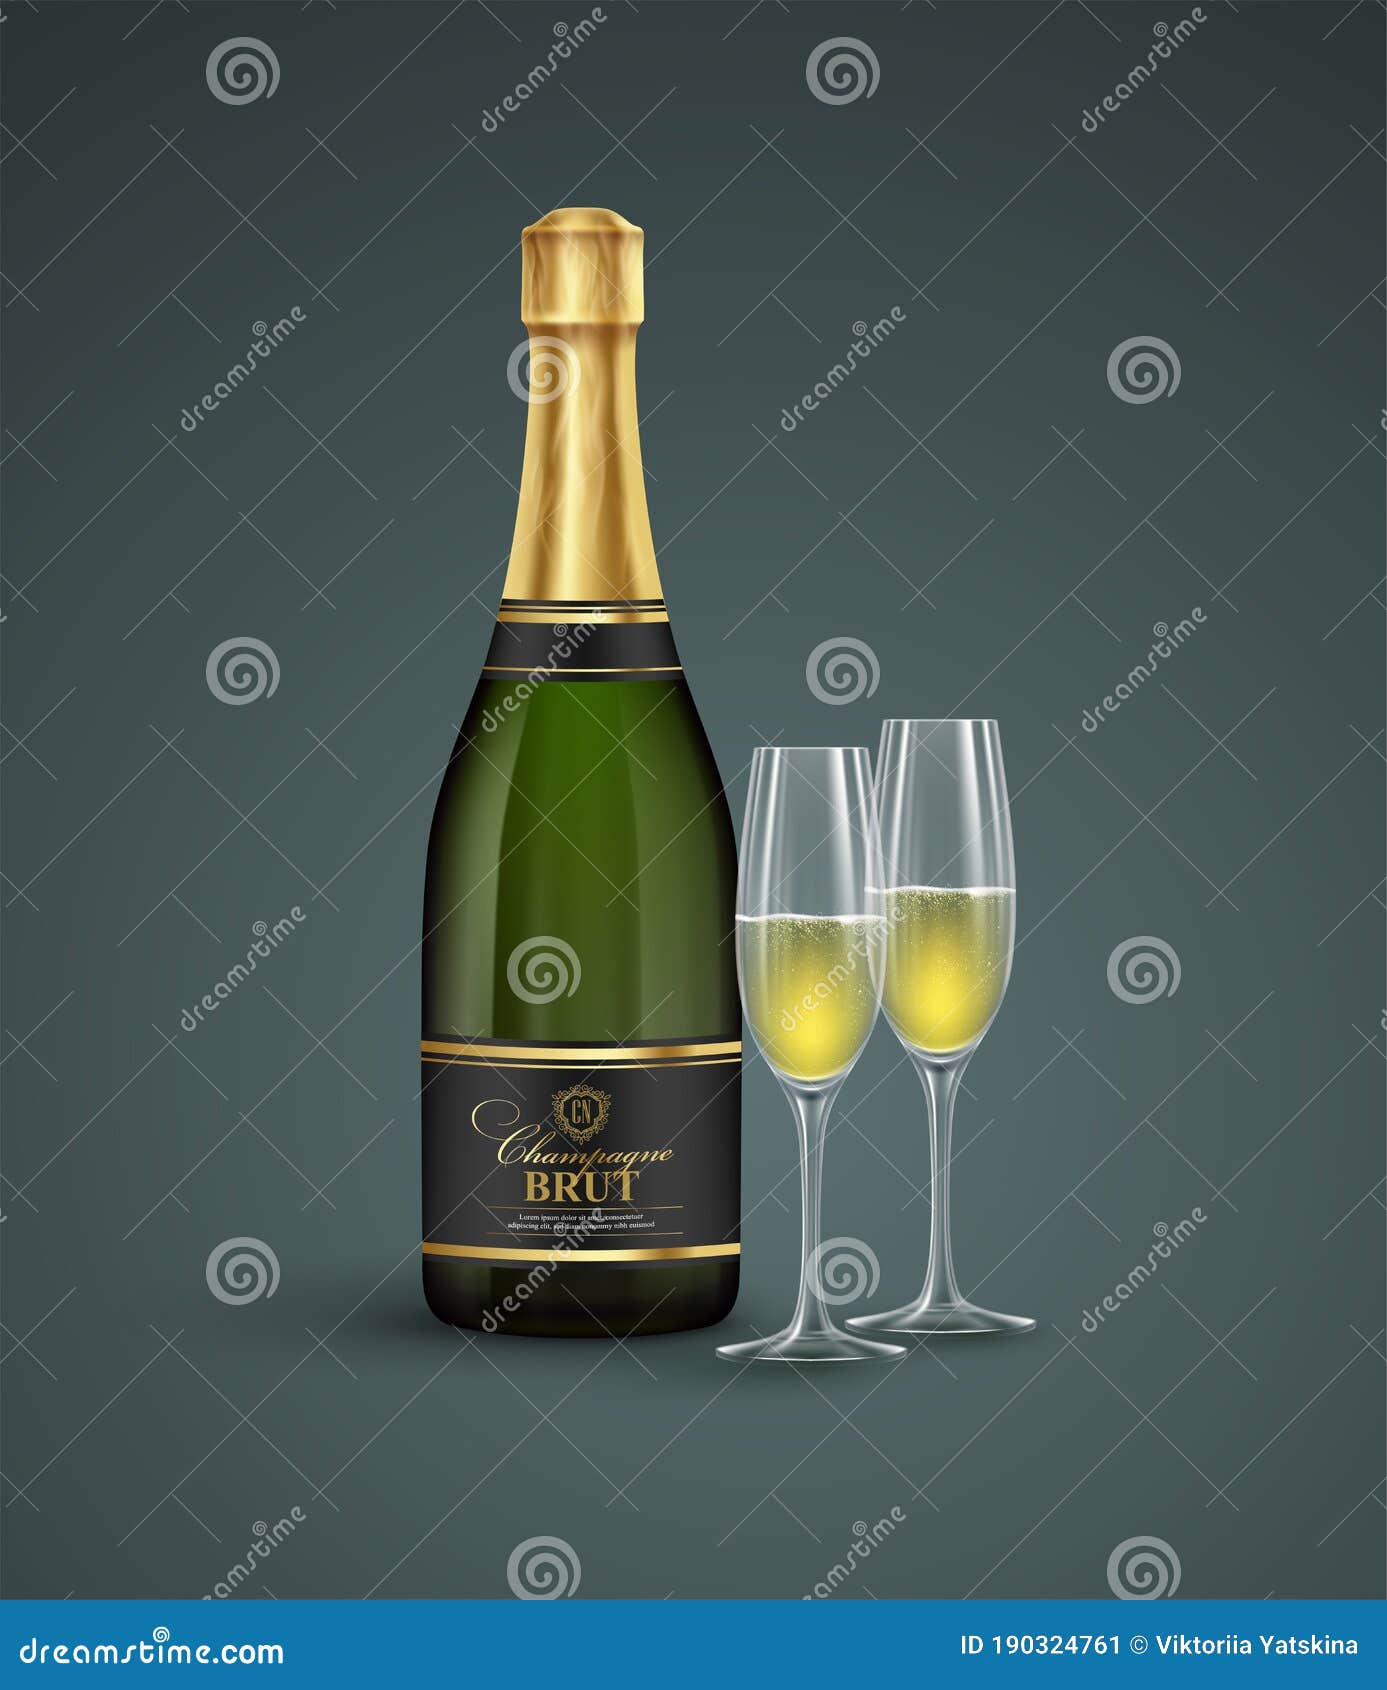 Realistic glass cups empty transparent champagne Vector Image